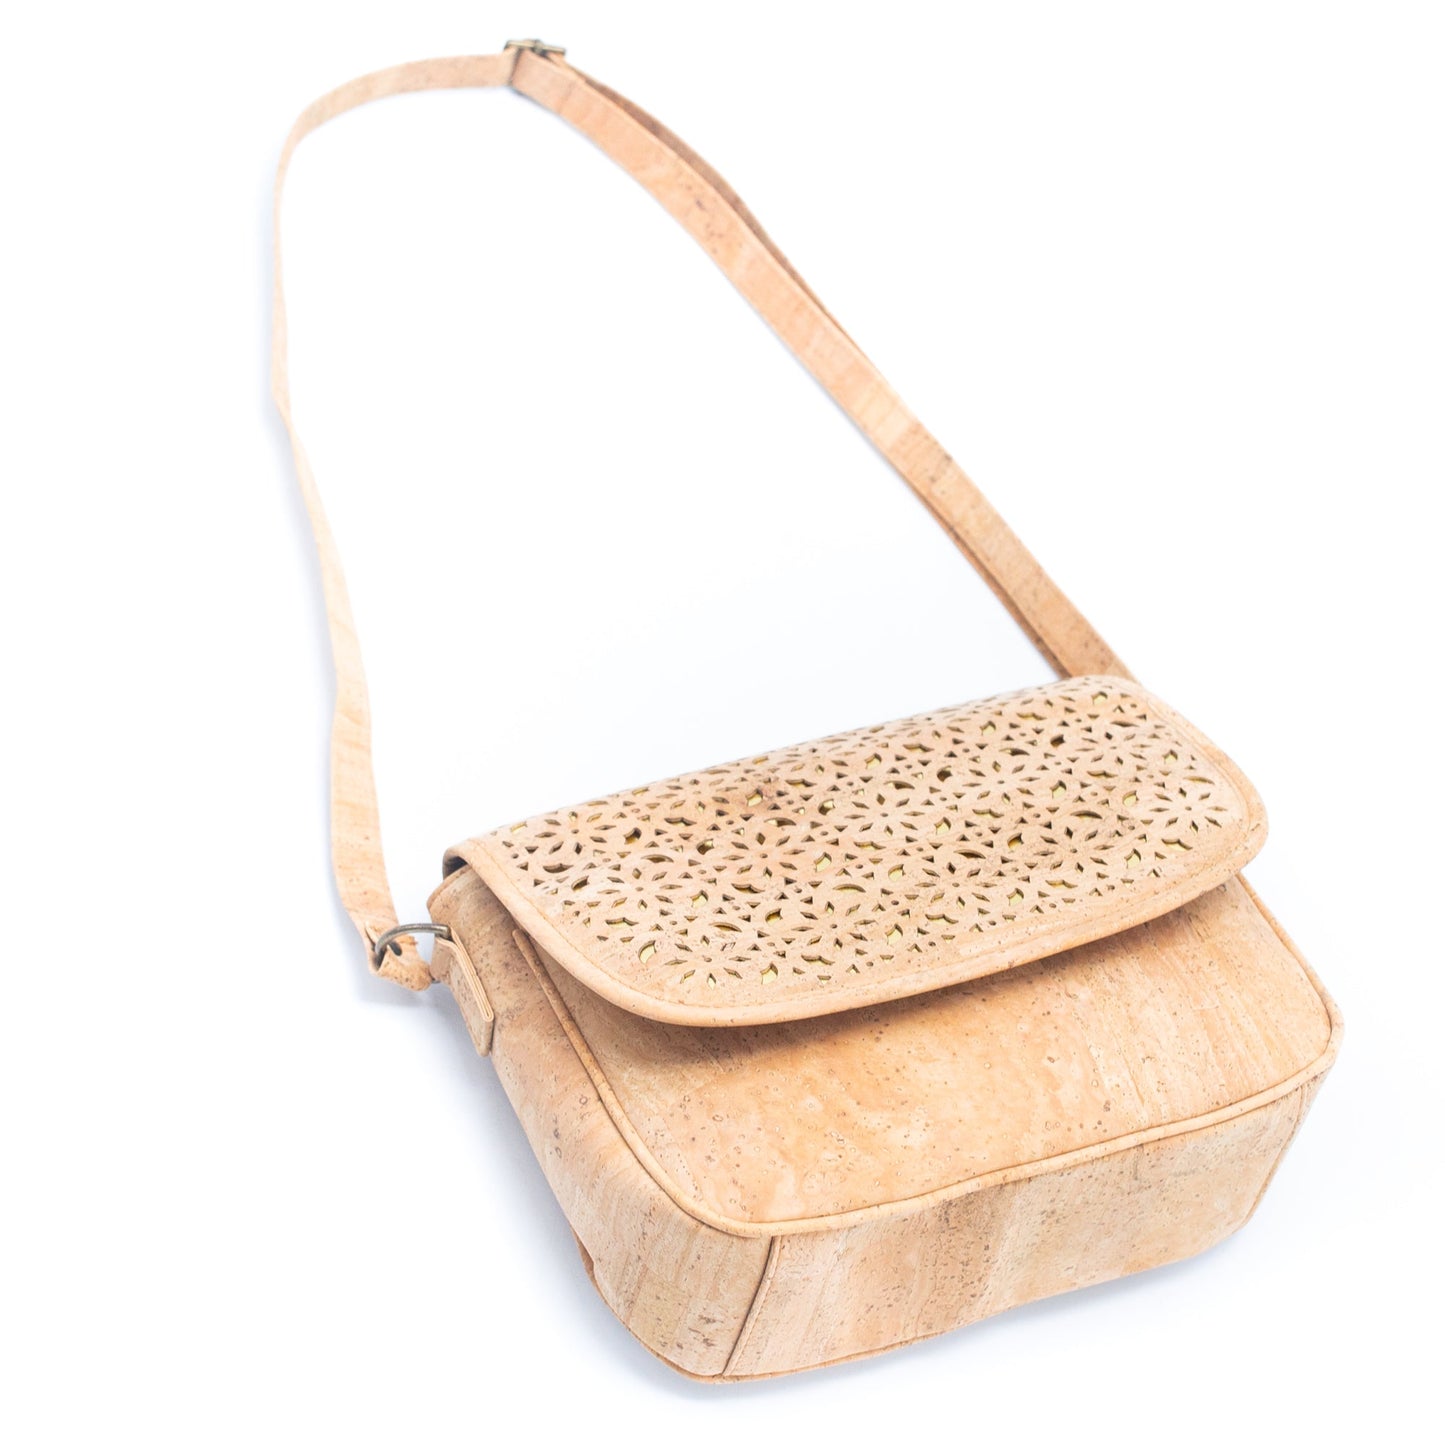 Colorful Dia-Flap Everyday Cork Sling Bag | THE CORK COLLECTION